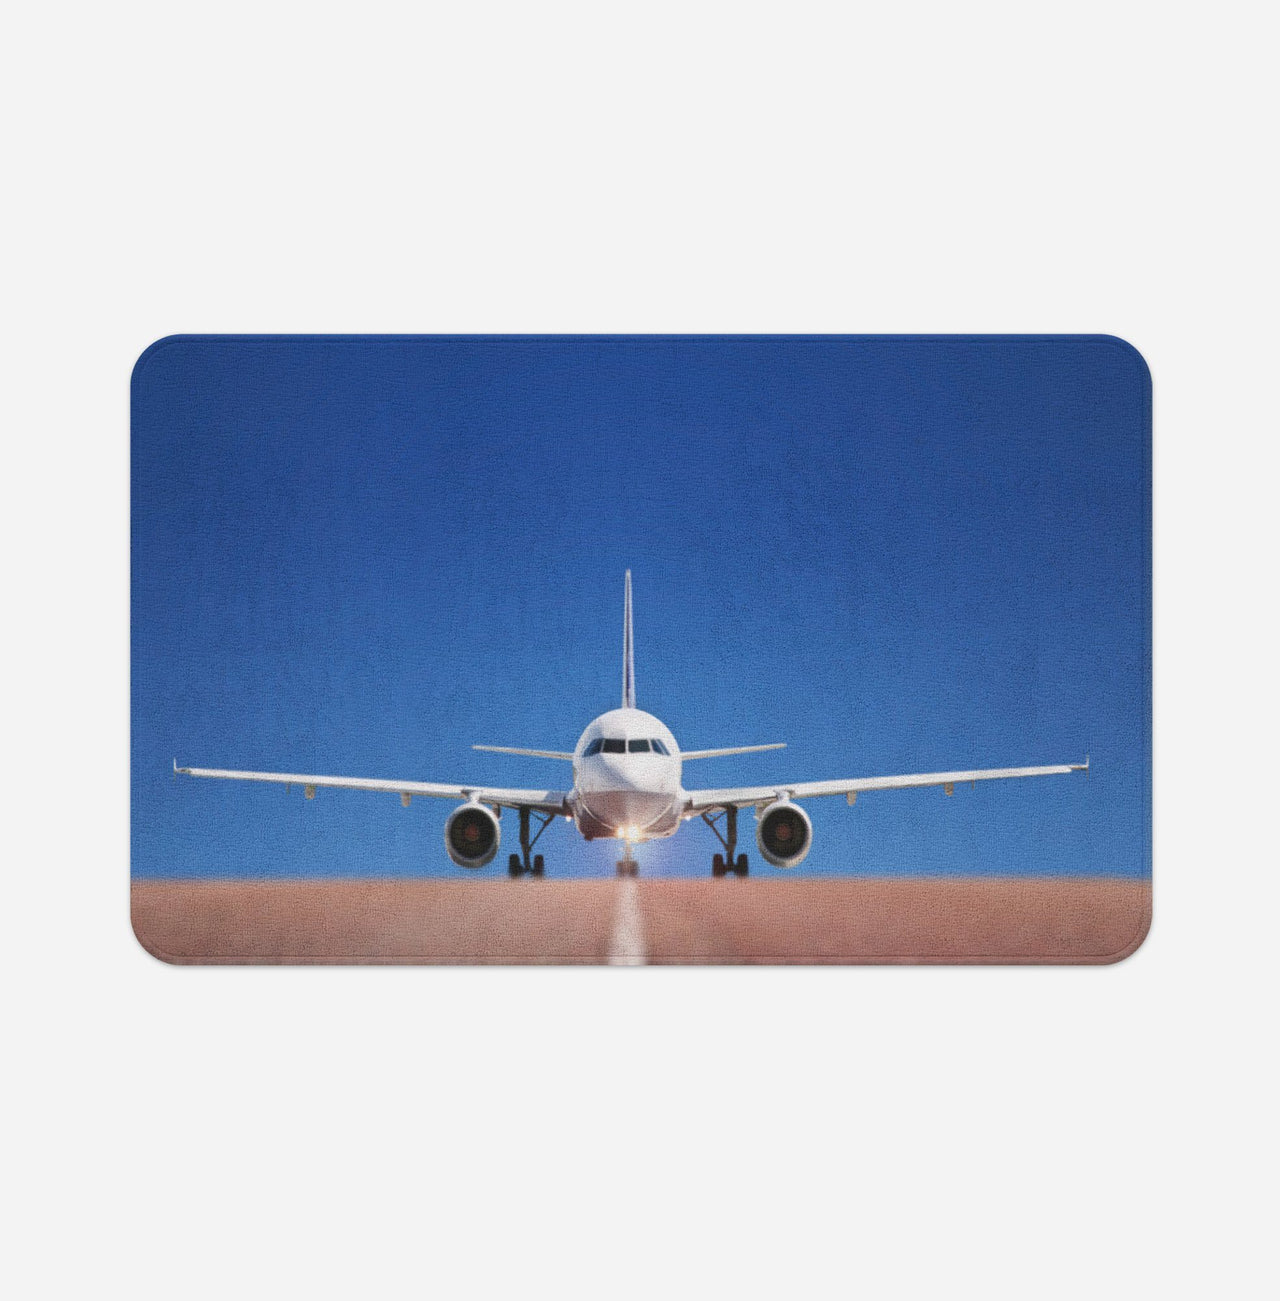 Face to Face with Airbus A320 Printed Door & Bath Mats Pilot Eyes Store Floor Mat 50x80cm 